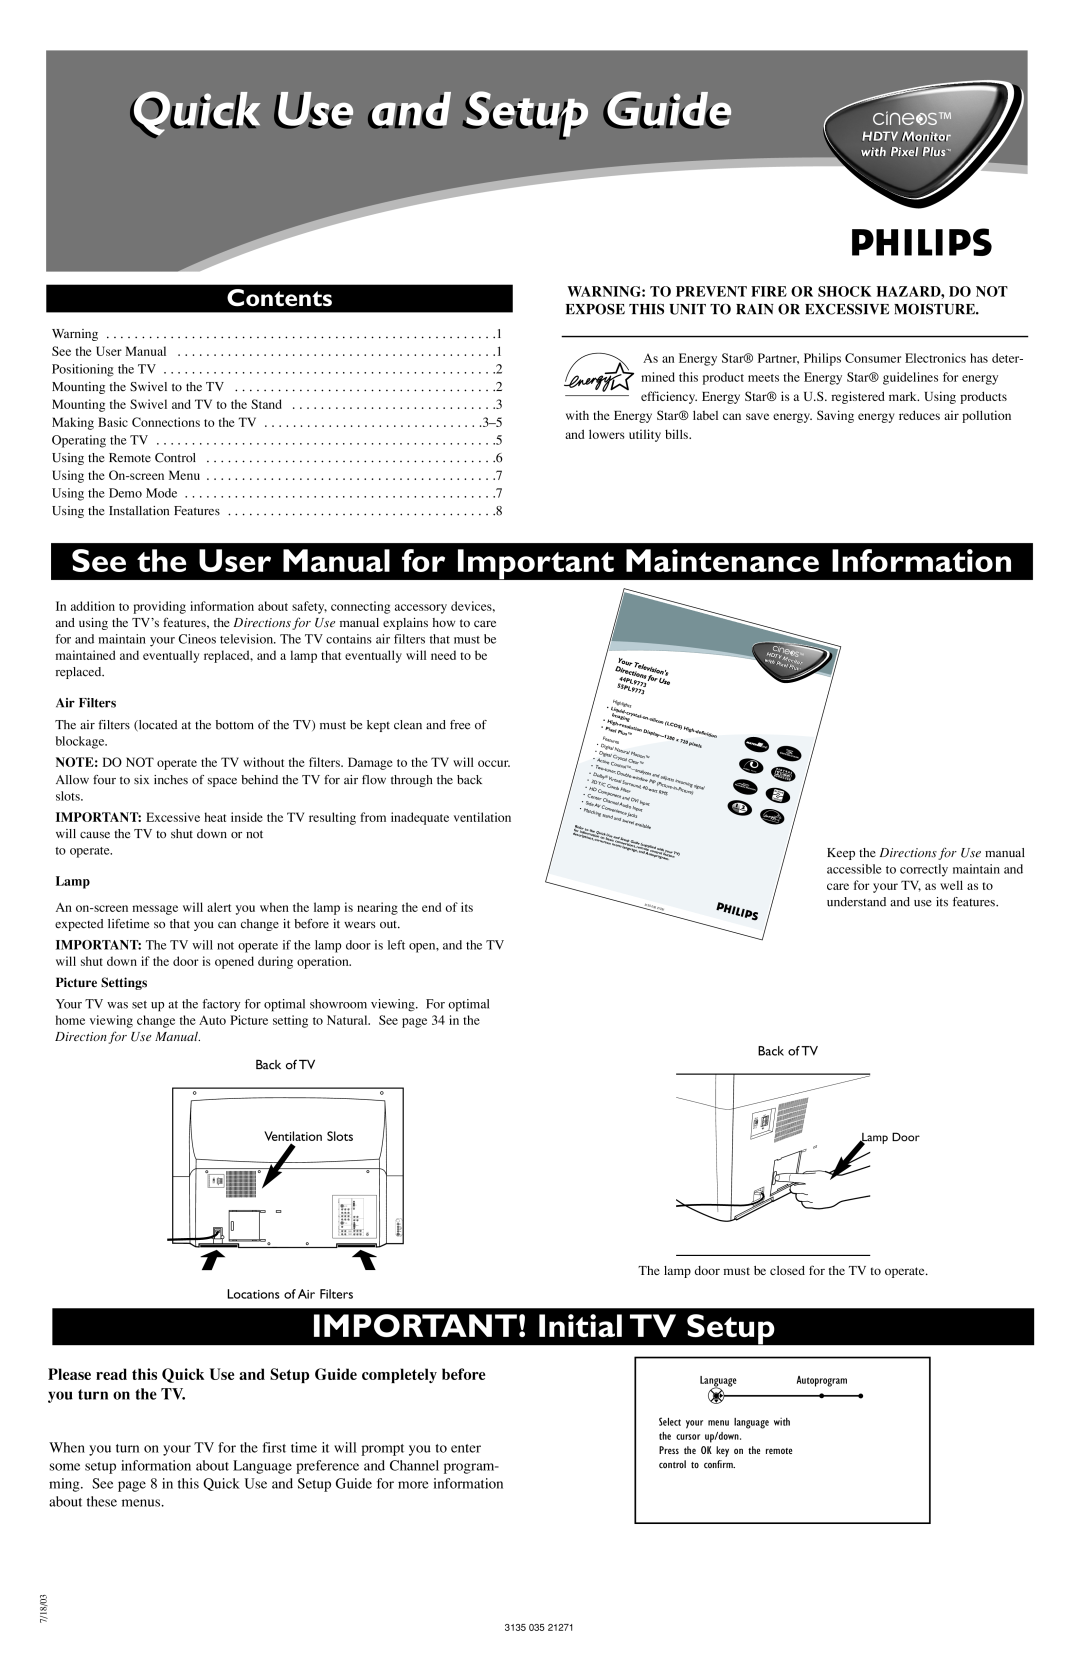 Philips CD-D13 user manual See the User Manual for Important Maintenance Information, IMPORTANT! Initial TV Setup, Lamp 